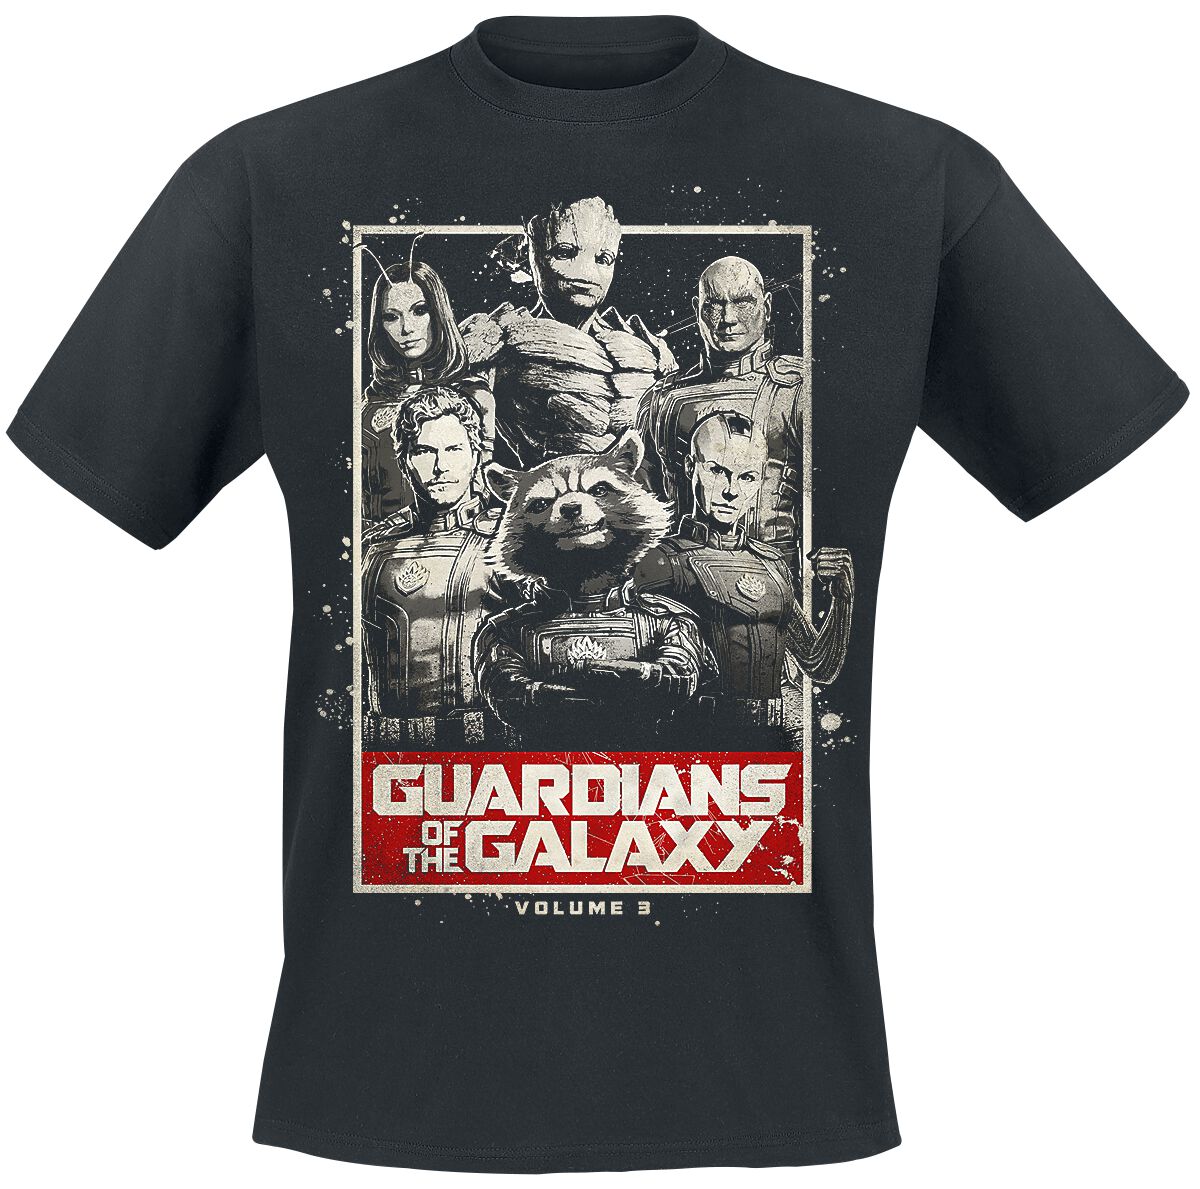 Guardians Of The Galaxy Vol. 3 - The Guardians T-Shirt schwarz in XL von Guardians Of The Galaxy